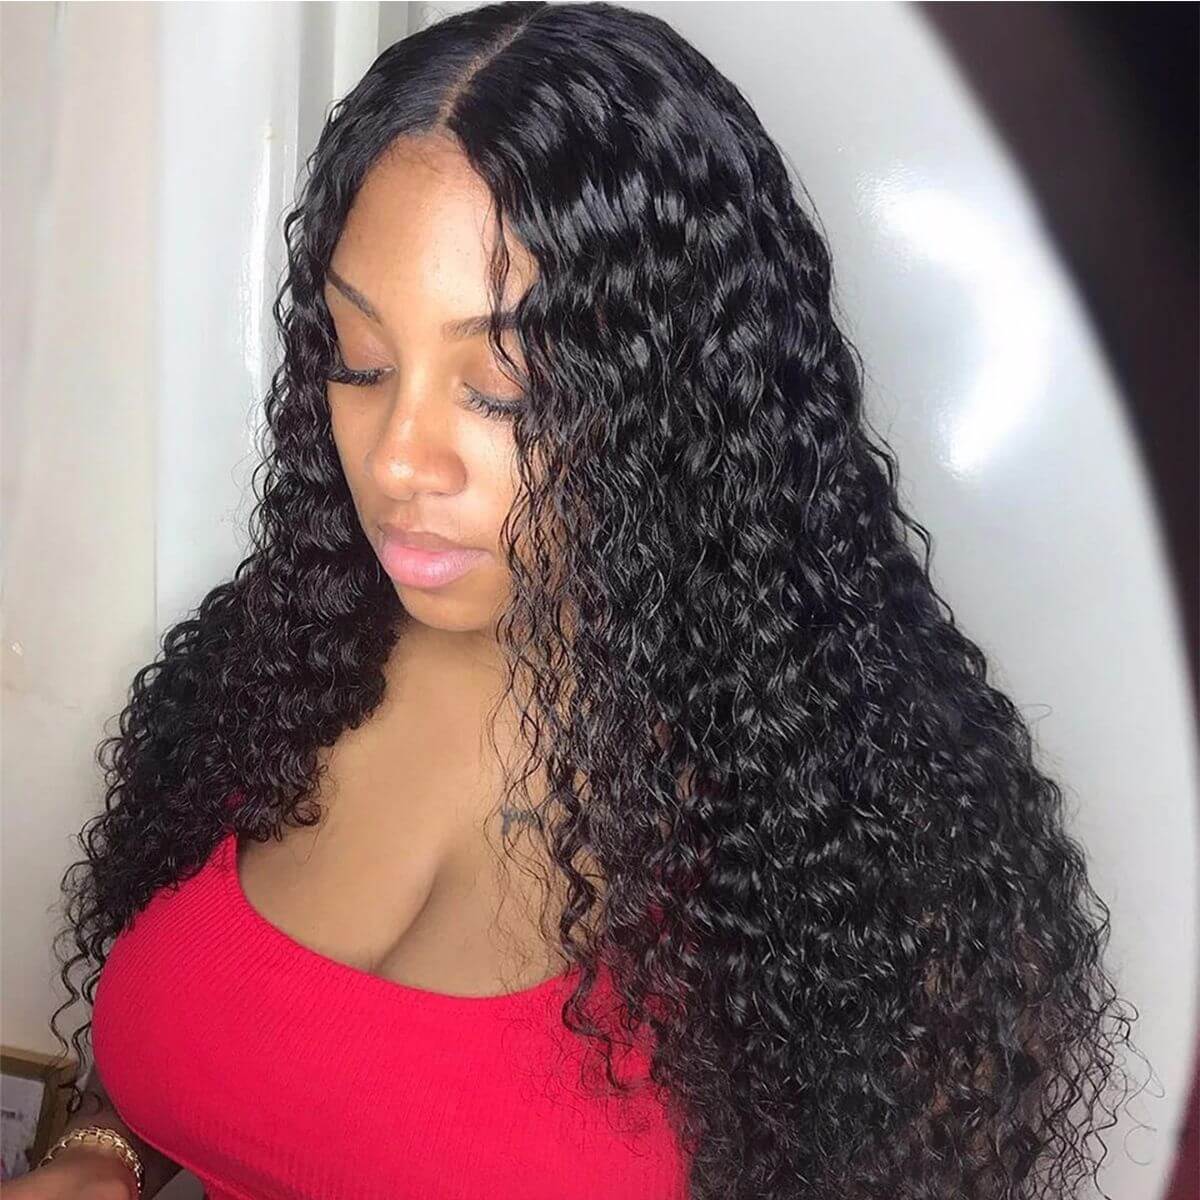 transparent lace frontal deep wave wig,deep wave transparent lace frontal wigs,transparent lace front wigs,transparent 13×4 lace frontal wigs,deep wave transparent lace wig,cheap deep wave transparent lace wig